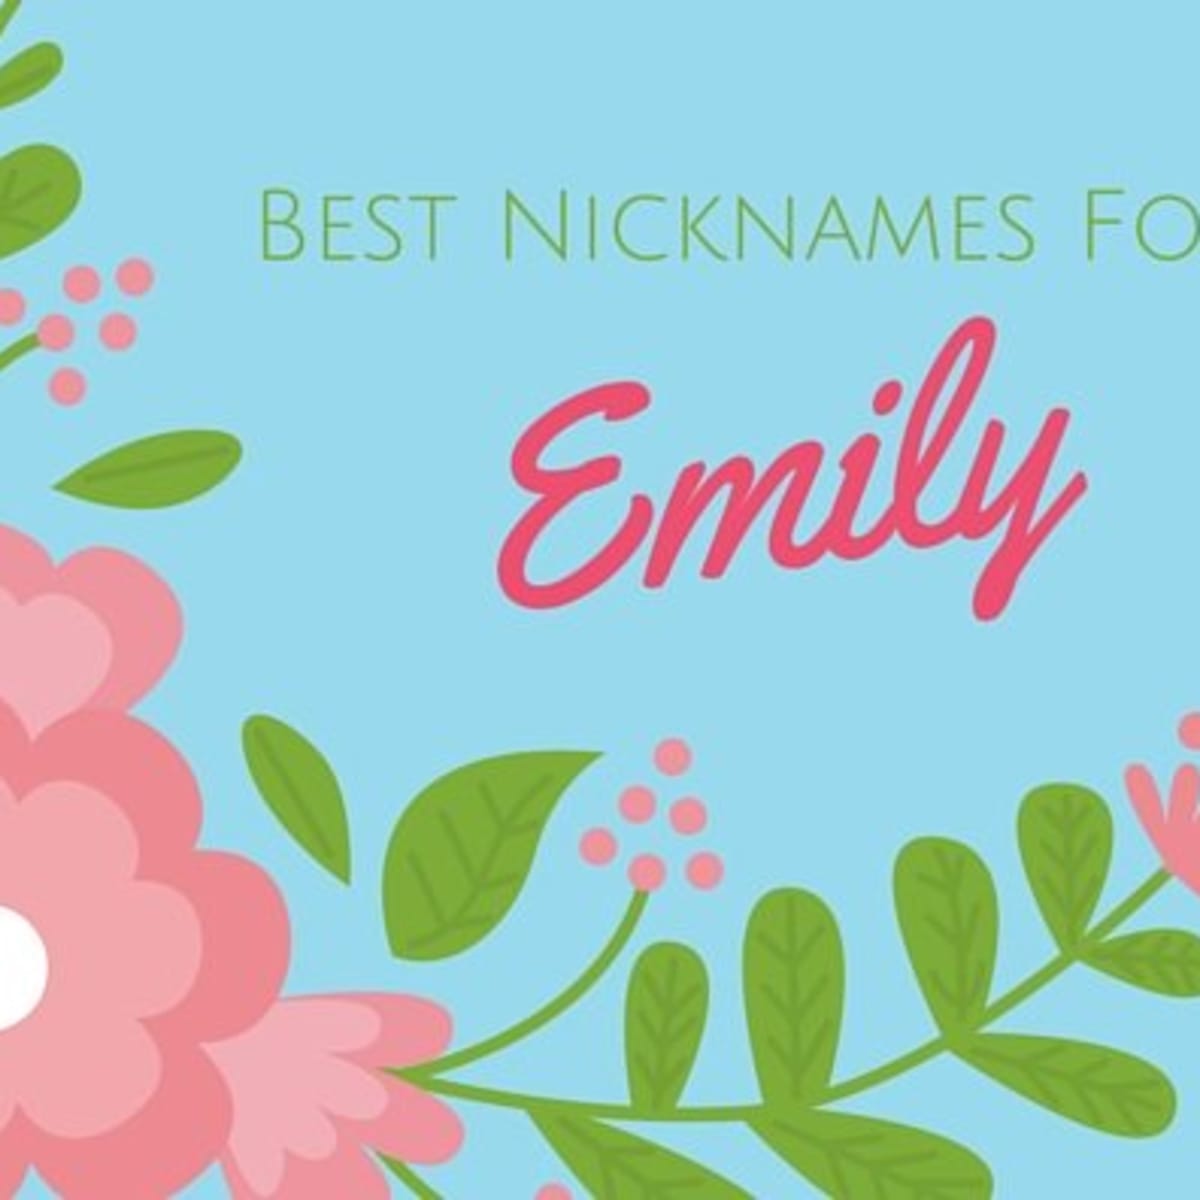 Best nicknames. Emily (given name). Good names. Beautiful nickname for girls. My name is beautiful